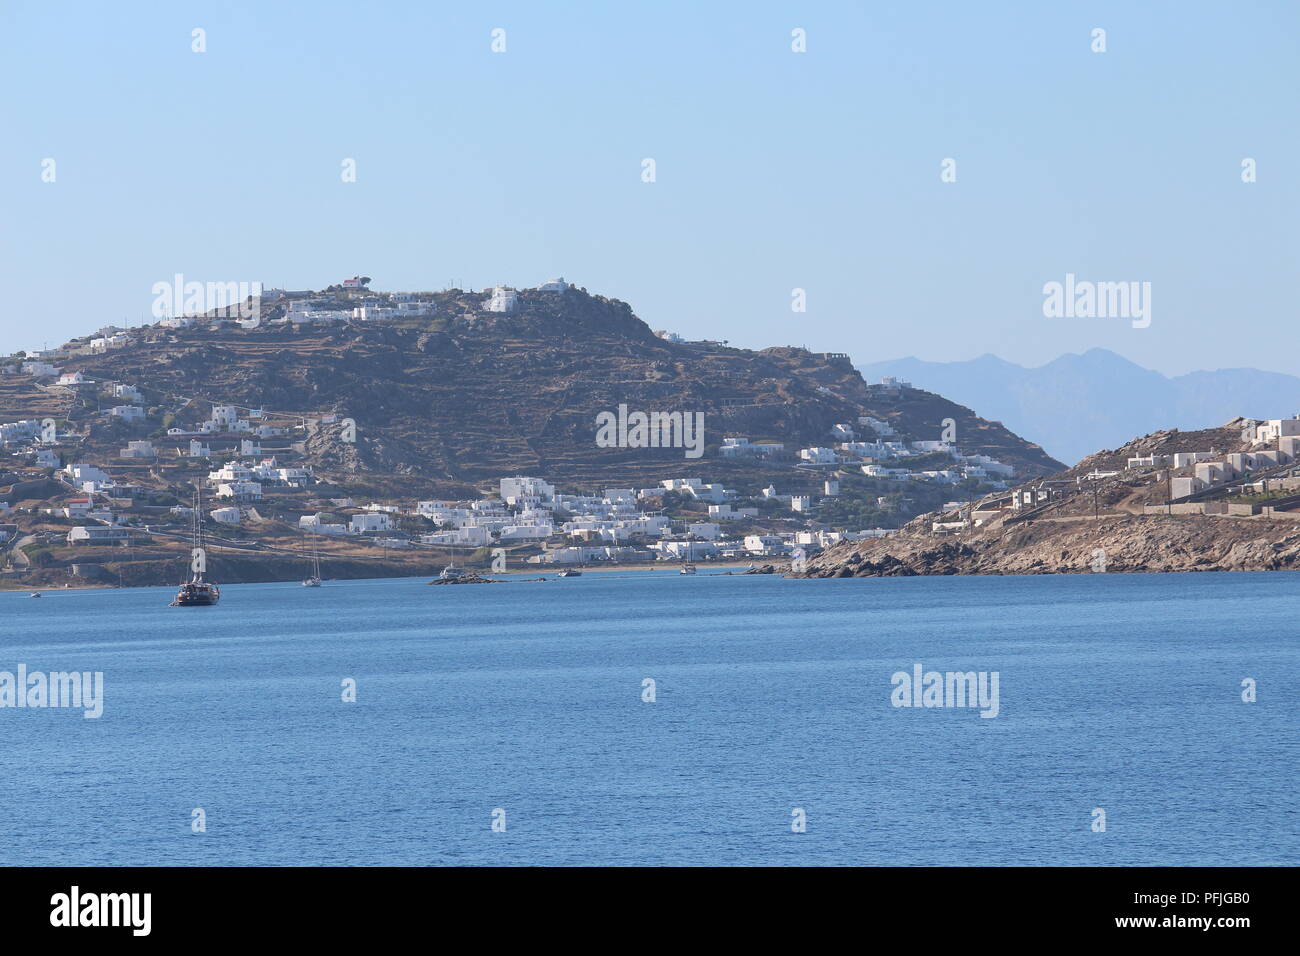 View of the island of Mykonos from a distance showing villages on the hills Stock Photo